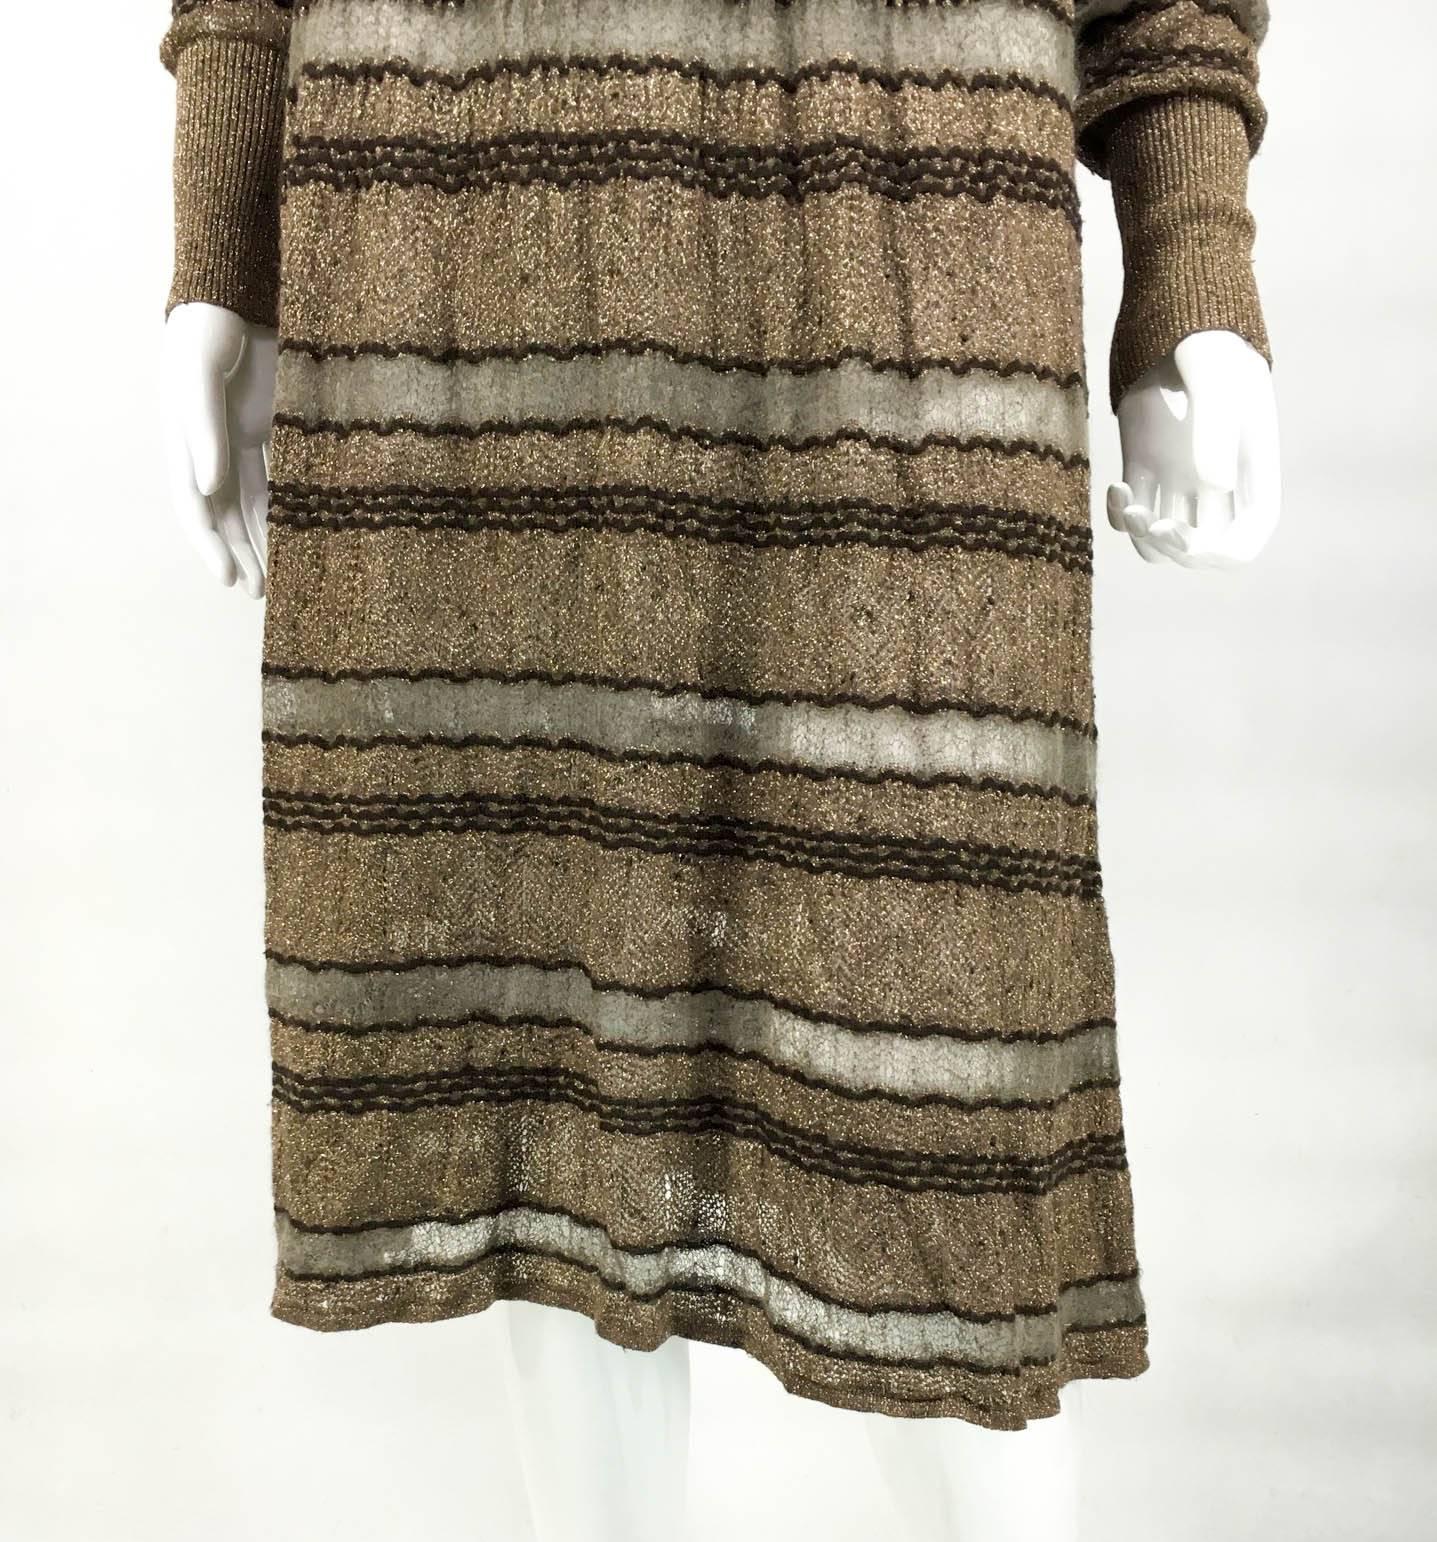 Kenzo Lurex Sheer Knitted Dress - 1990s For Sale 1